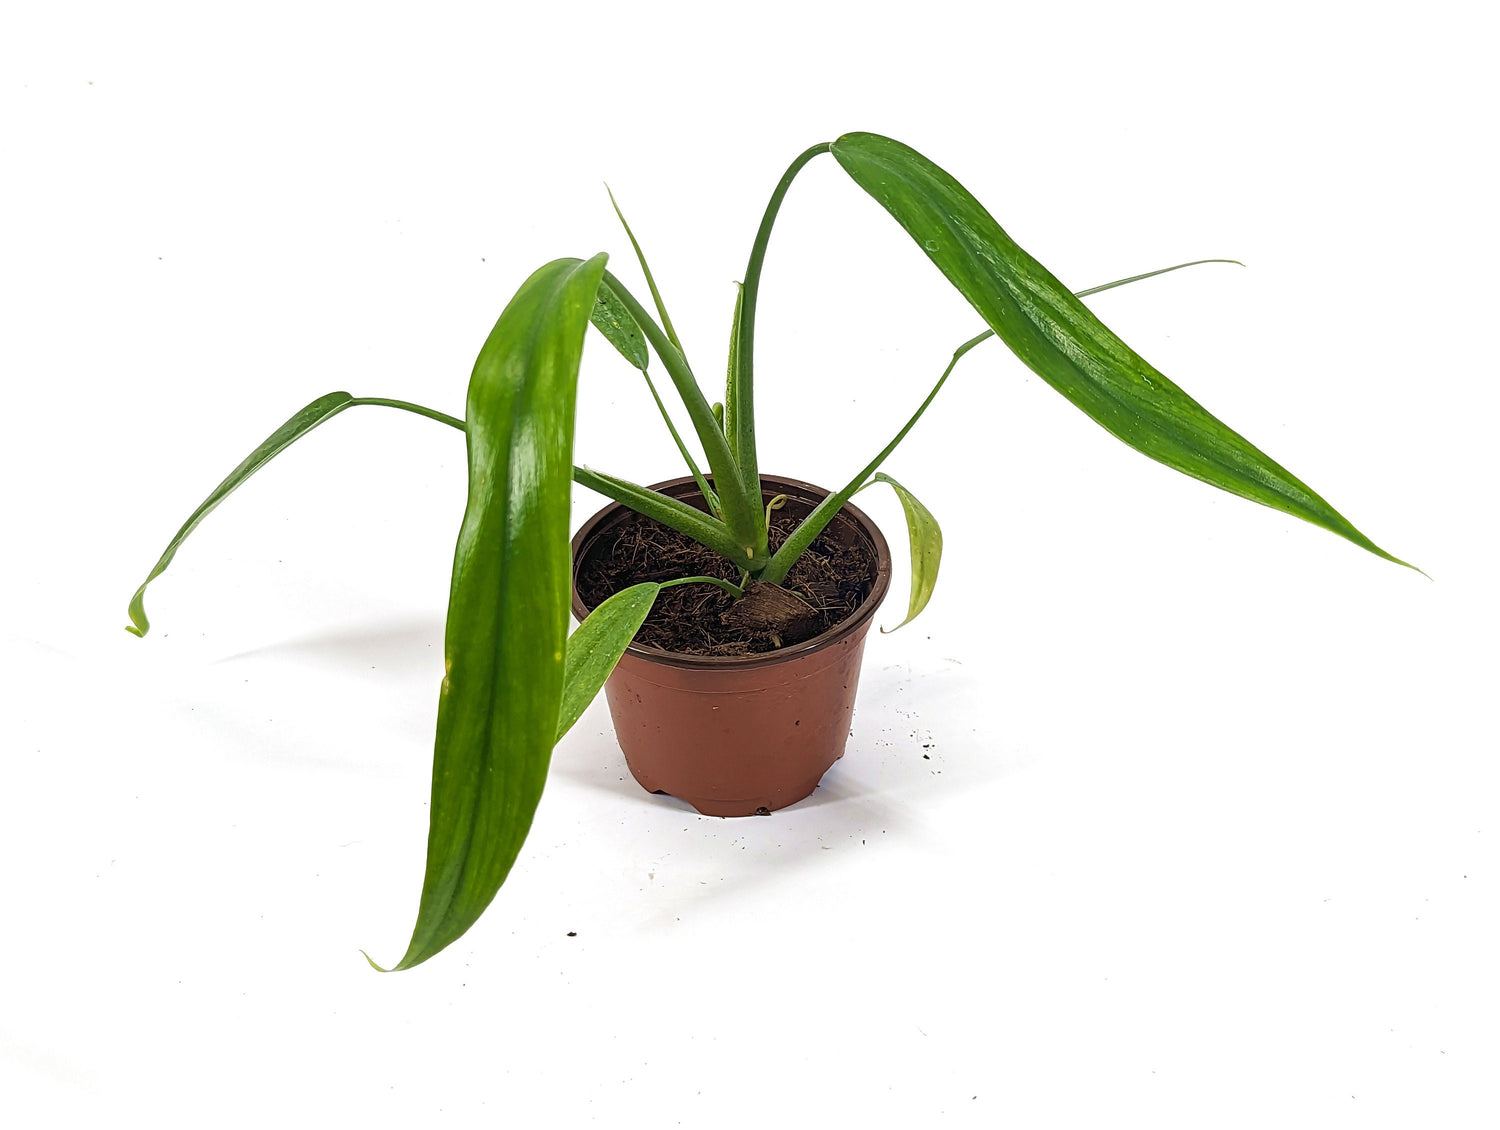 Philodendron Holtonianum